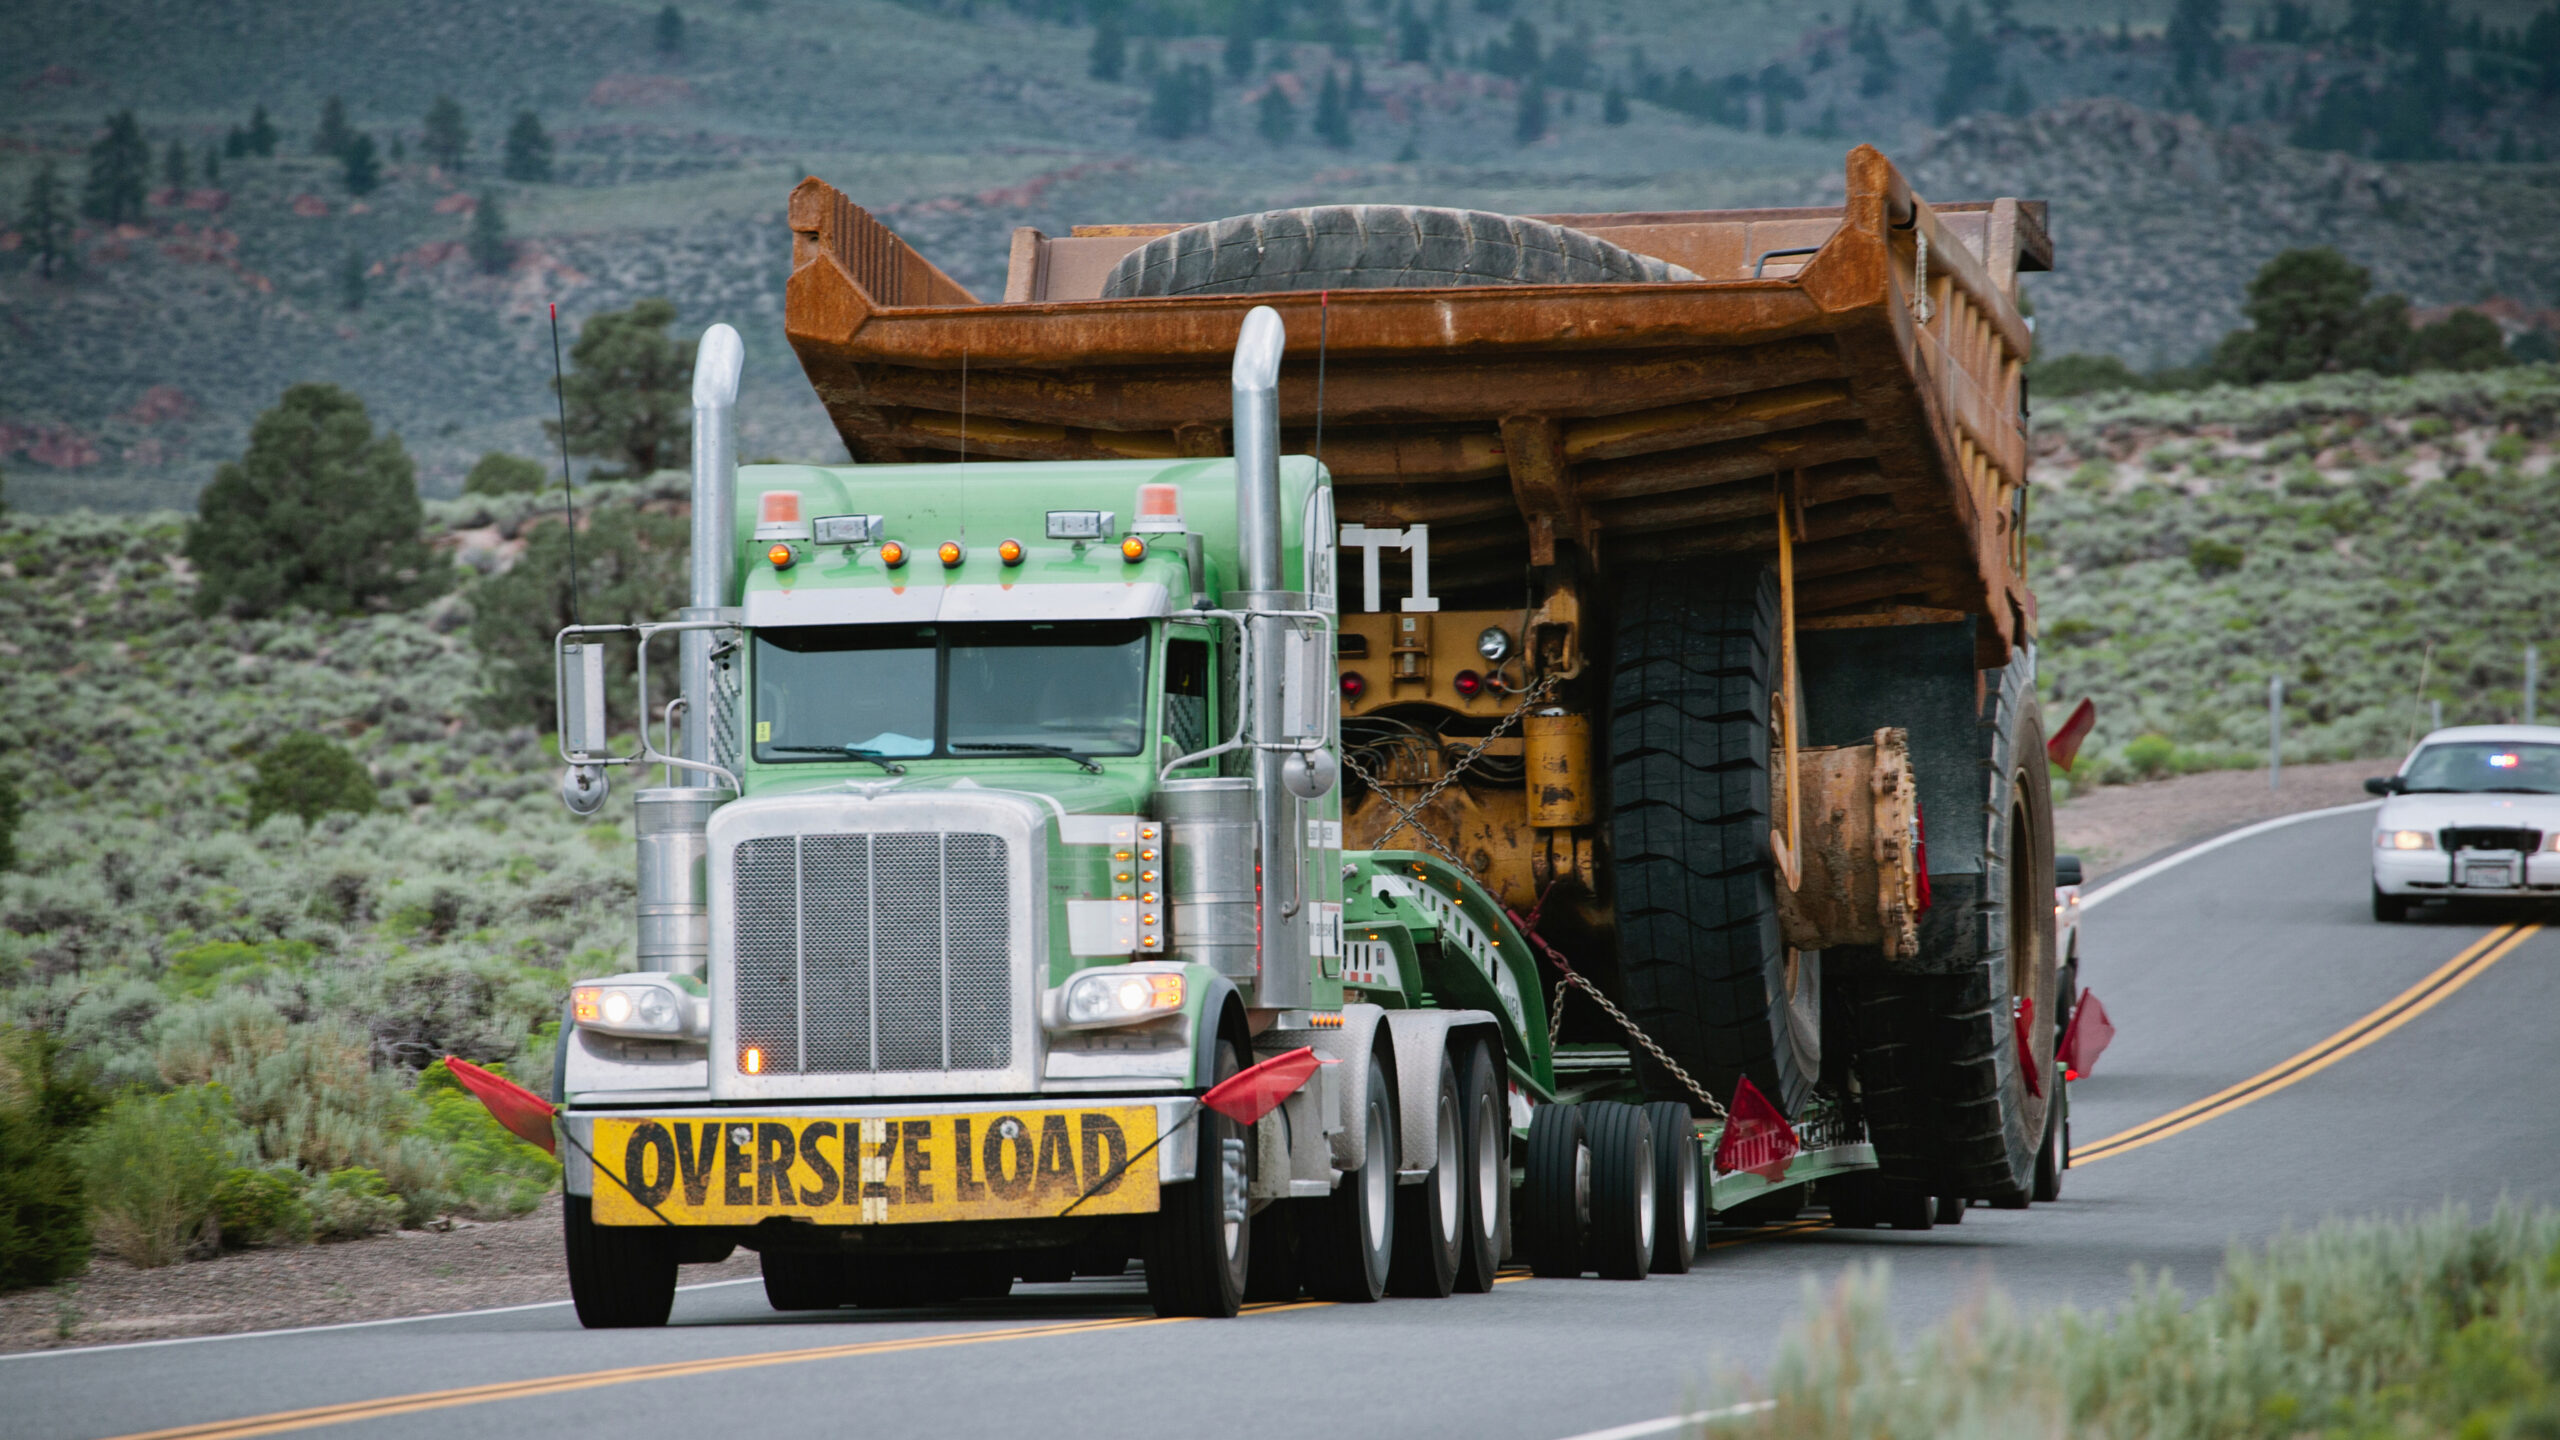 Truck Accident Attorney for Injuries Caused by Oversized Loads - Wilshire Law Firm